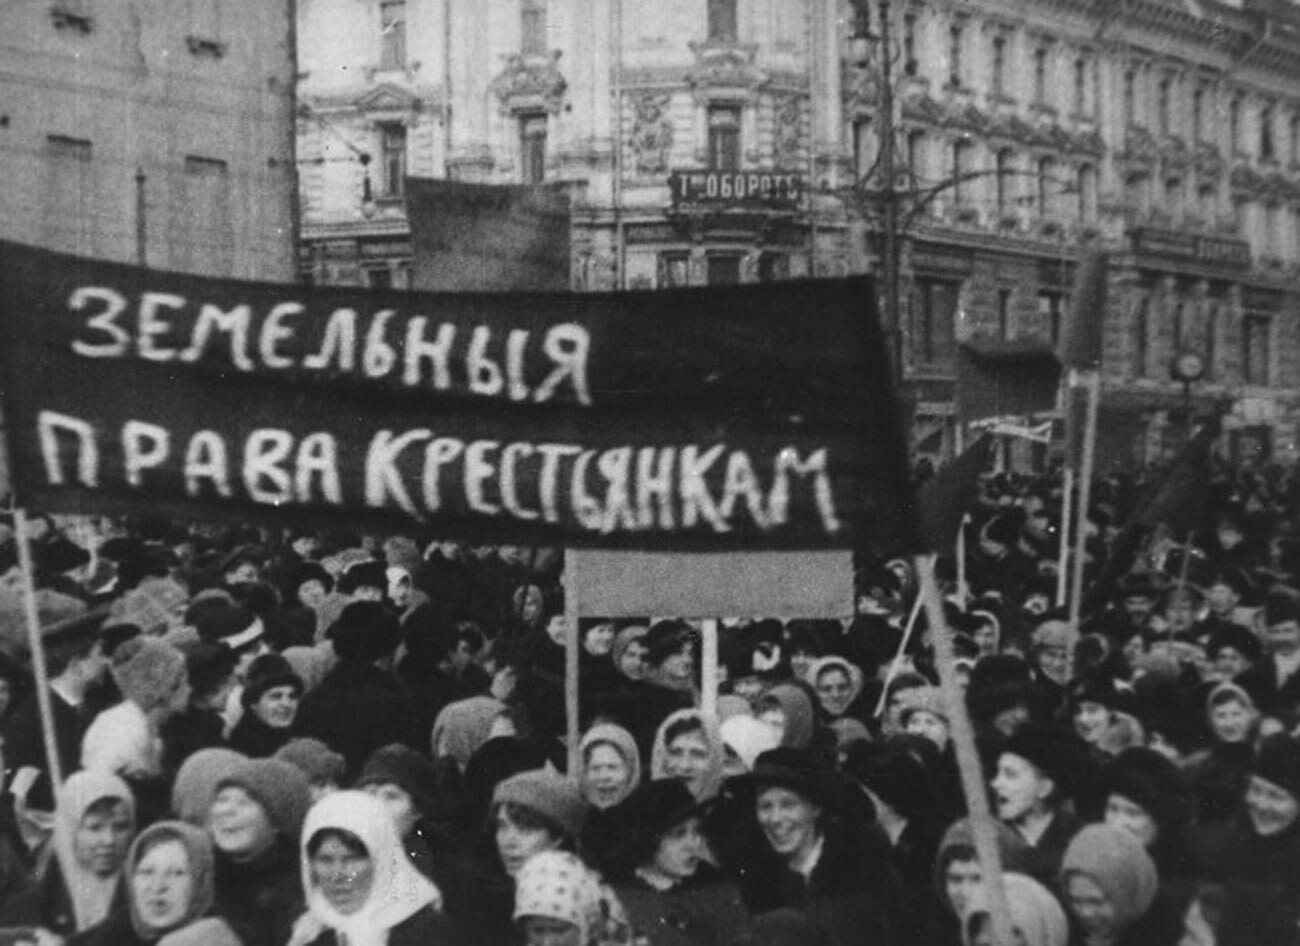 A banner with the inscription: “Land rights for peasant women”.